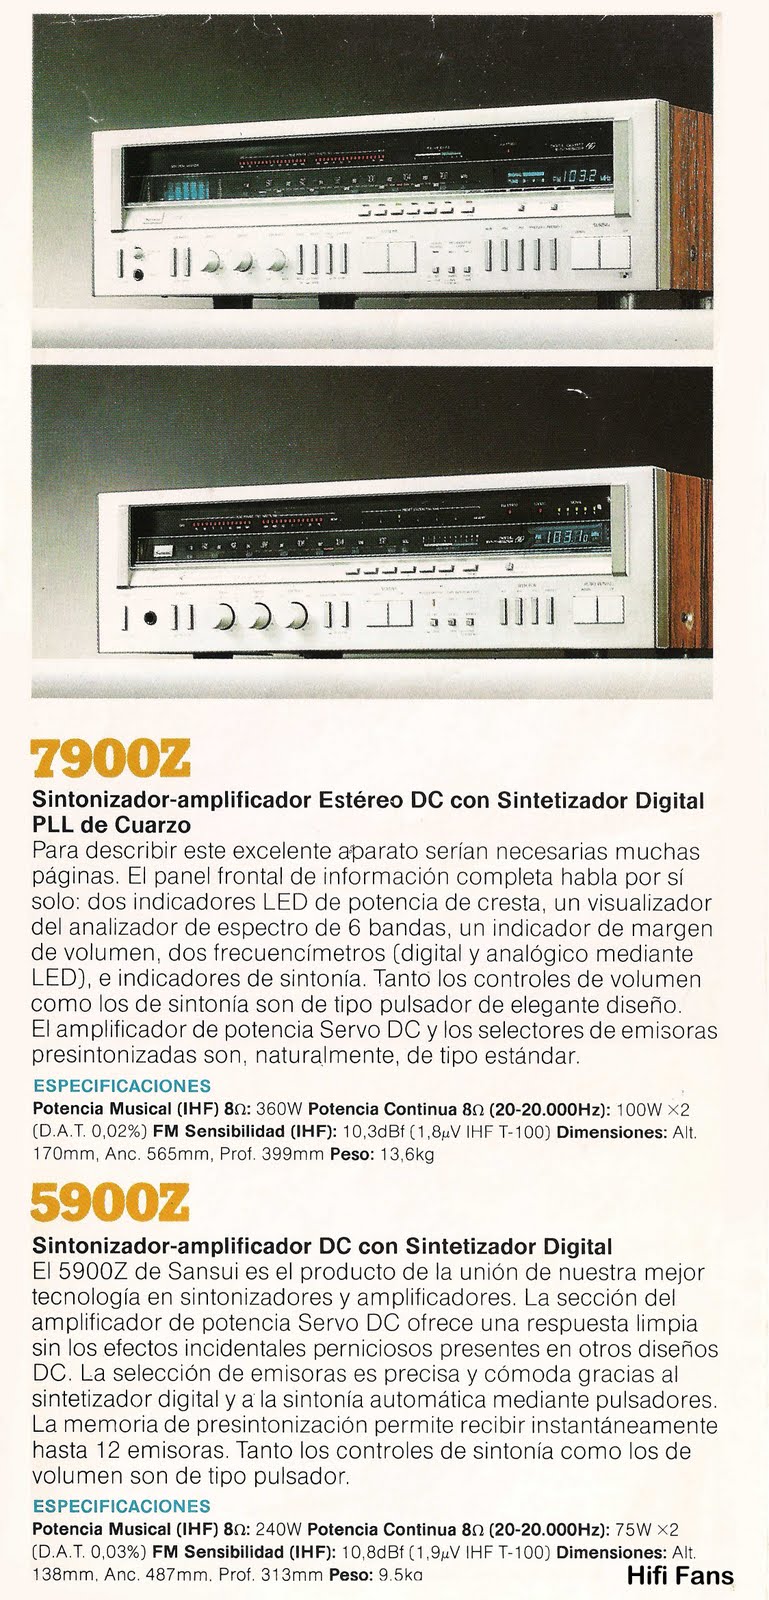 Catálogos,catálogos,catálogos... - Página 3 Sansui+receivers